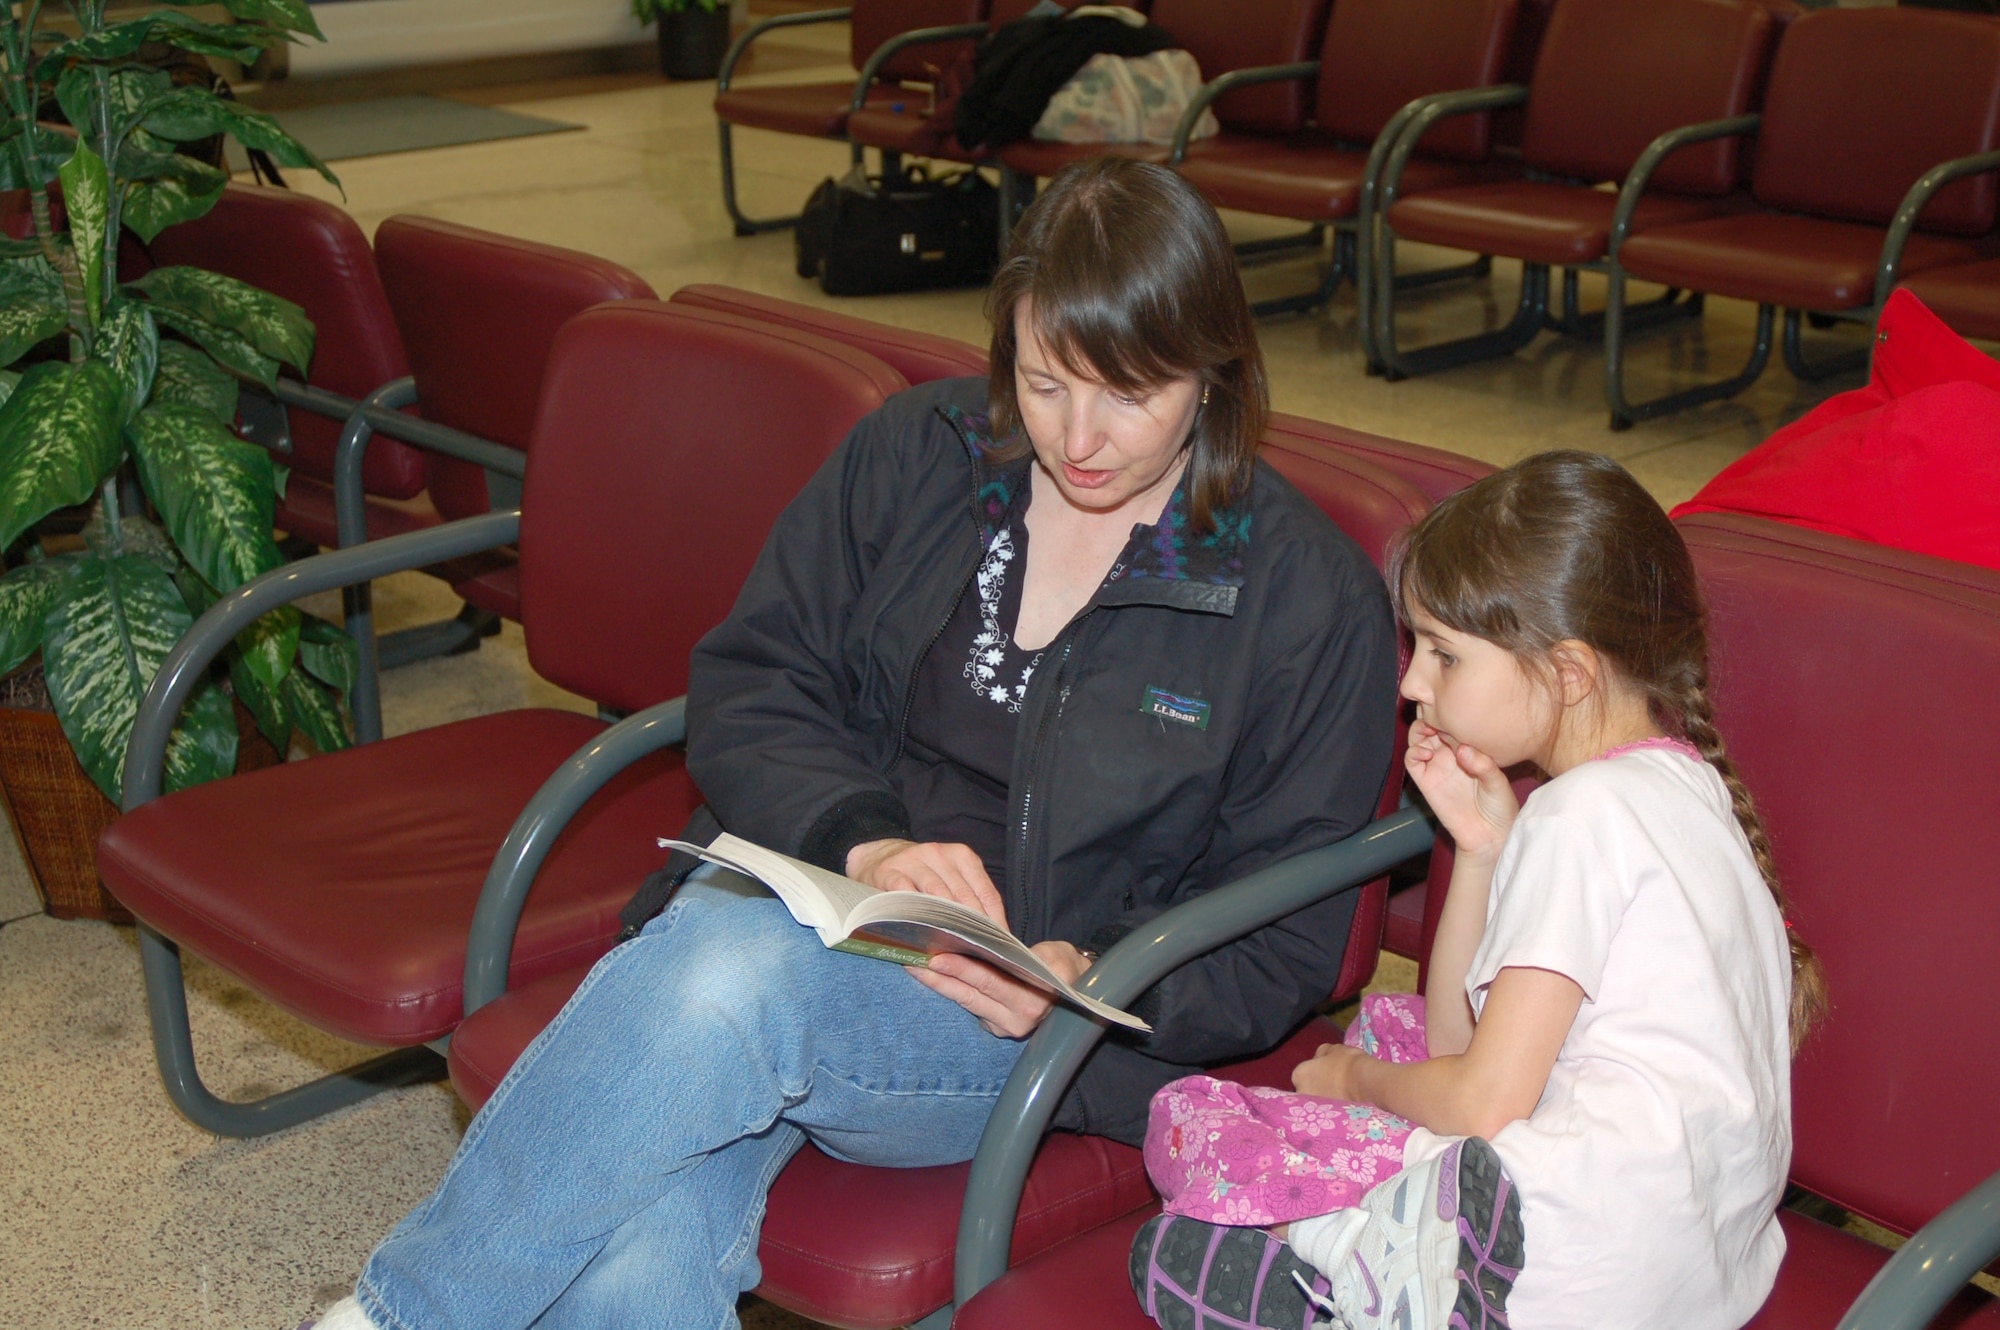 Burnadette Walkins, wife of Army Lt. Col. Paul Walkins, Stuttgar, Germany Special Operations commander, reads to daughter Adriana as they wait for a space-available flight to Ramstein, Germany. (U.S. Air Force photo/Photo by Tech. Sgt. Kevin Wallace)